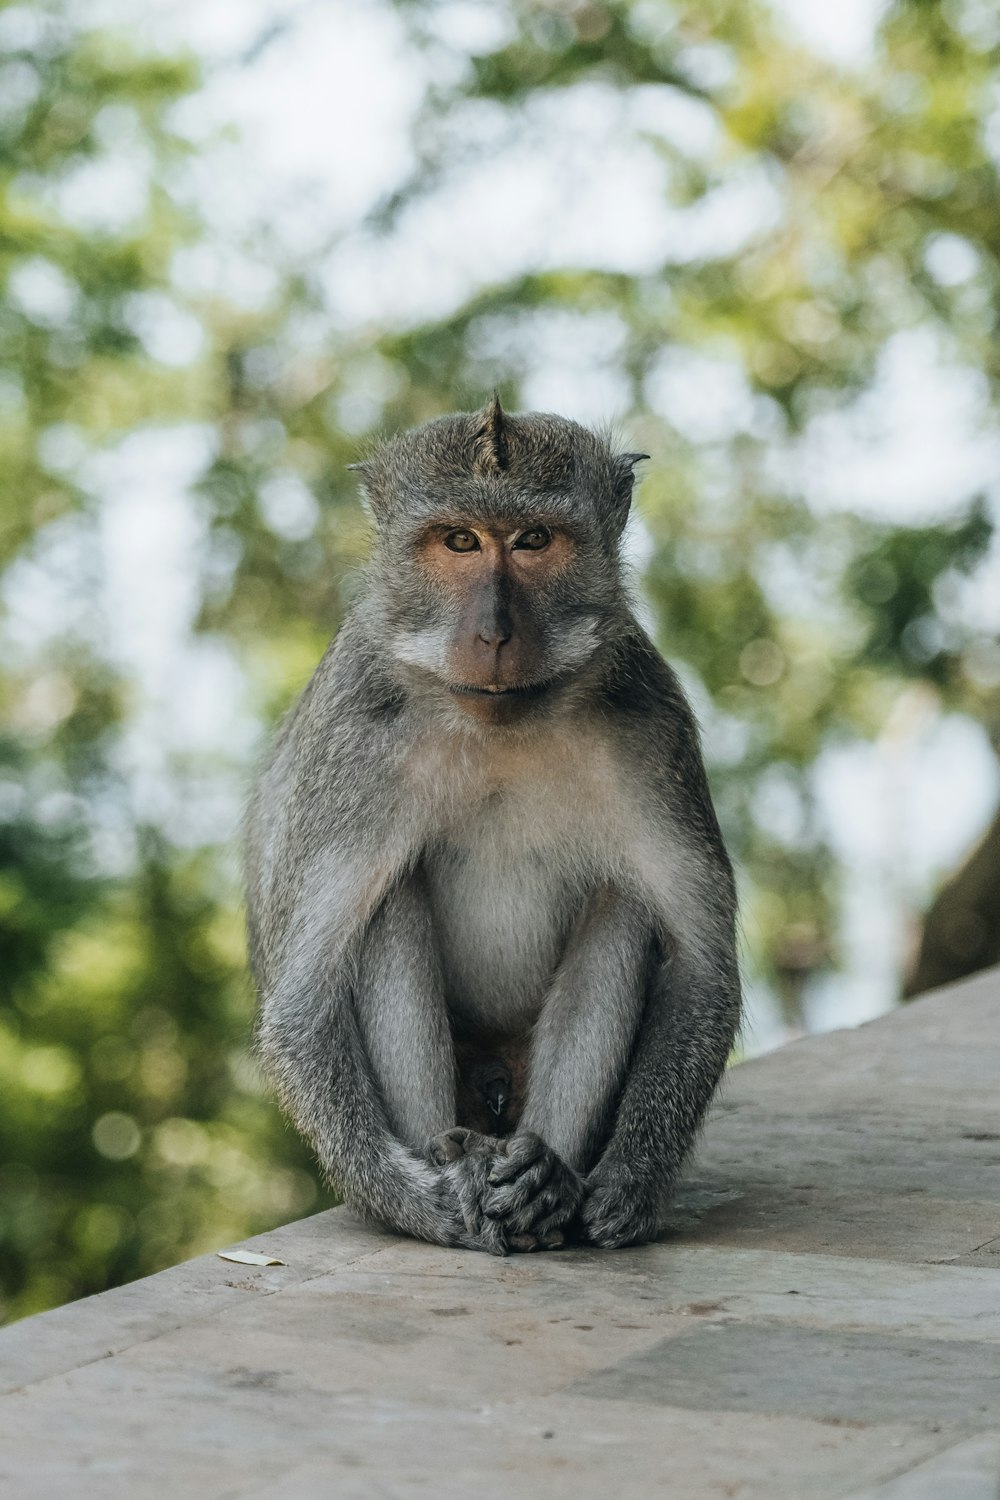 a monkey sitting on a ledge with trees in the background